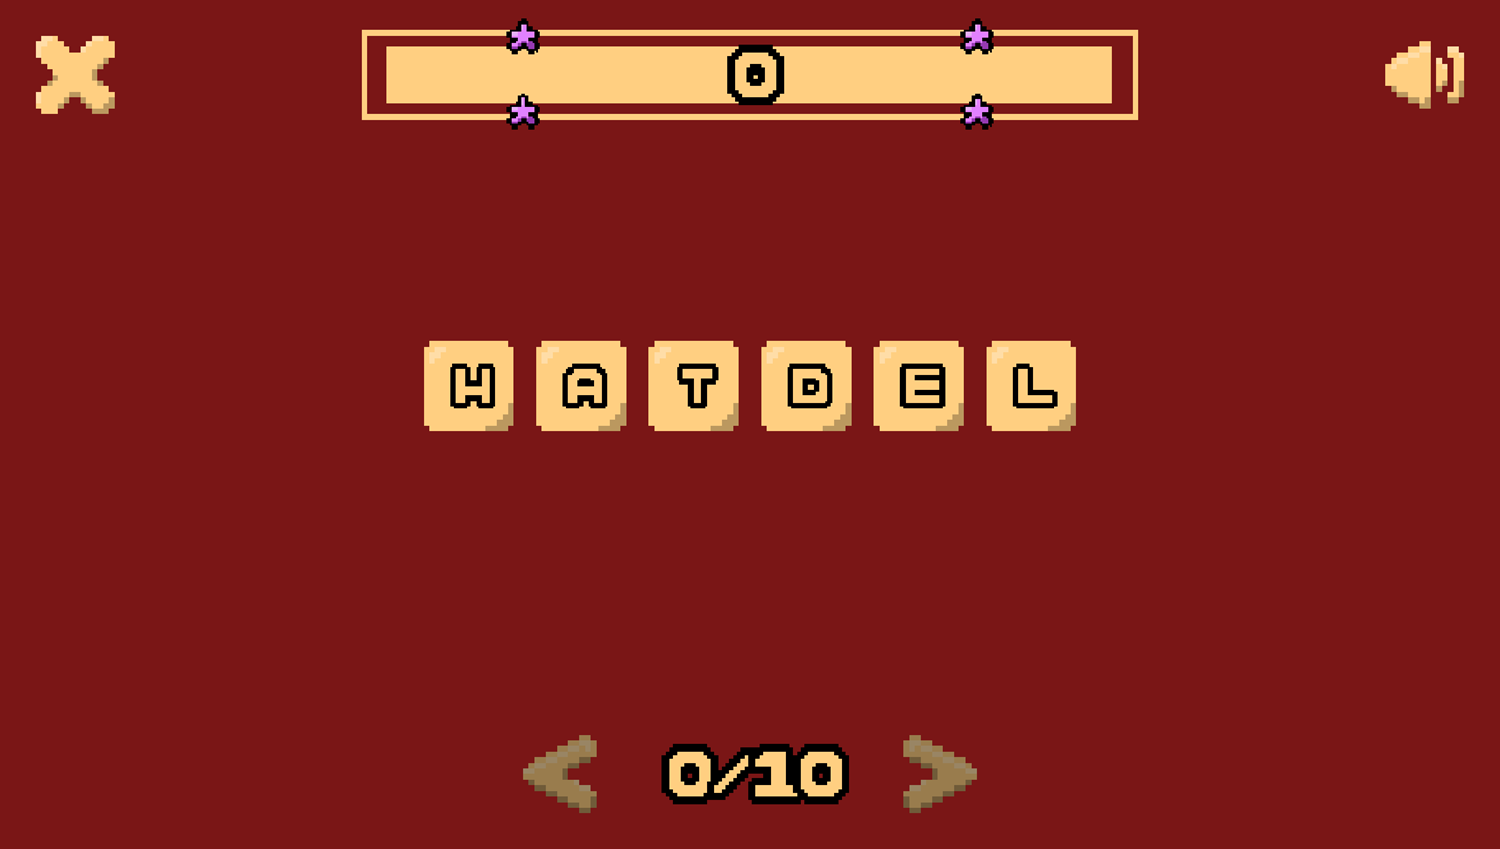 Word Master Game Question Screenshot.